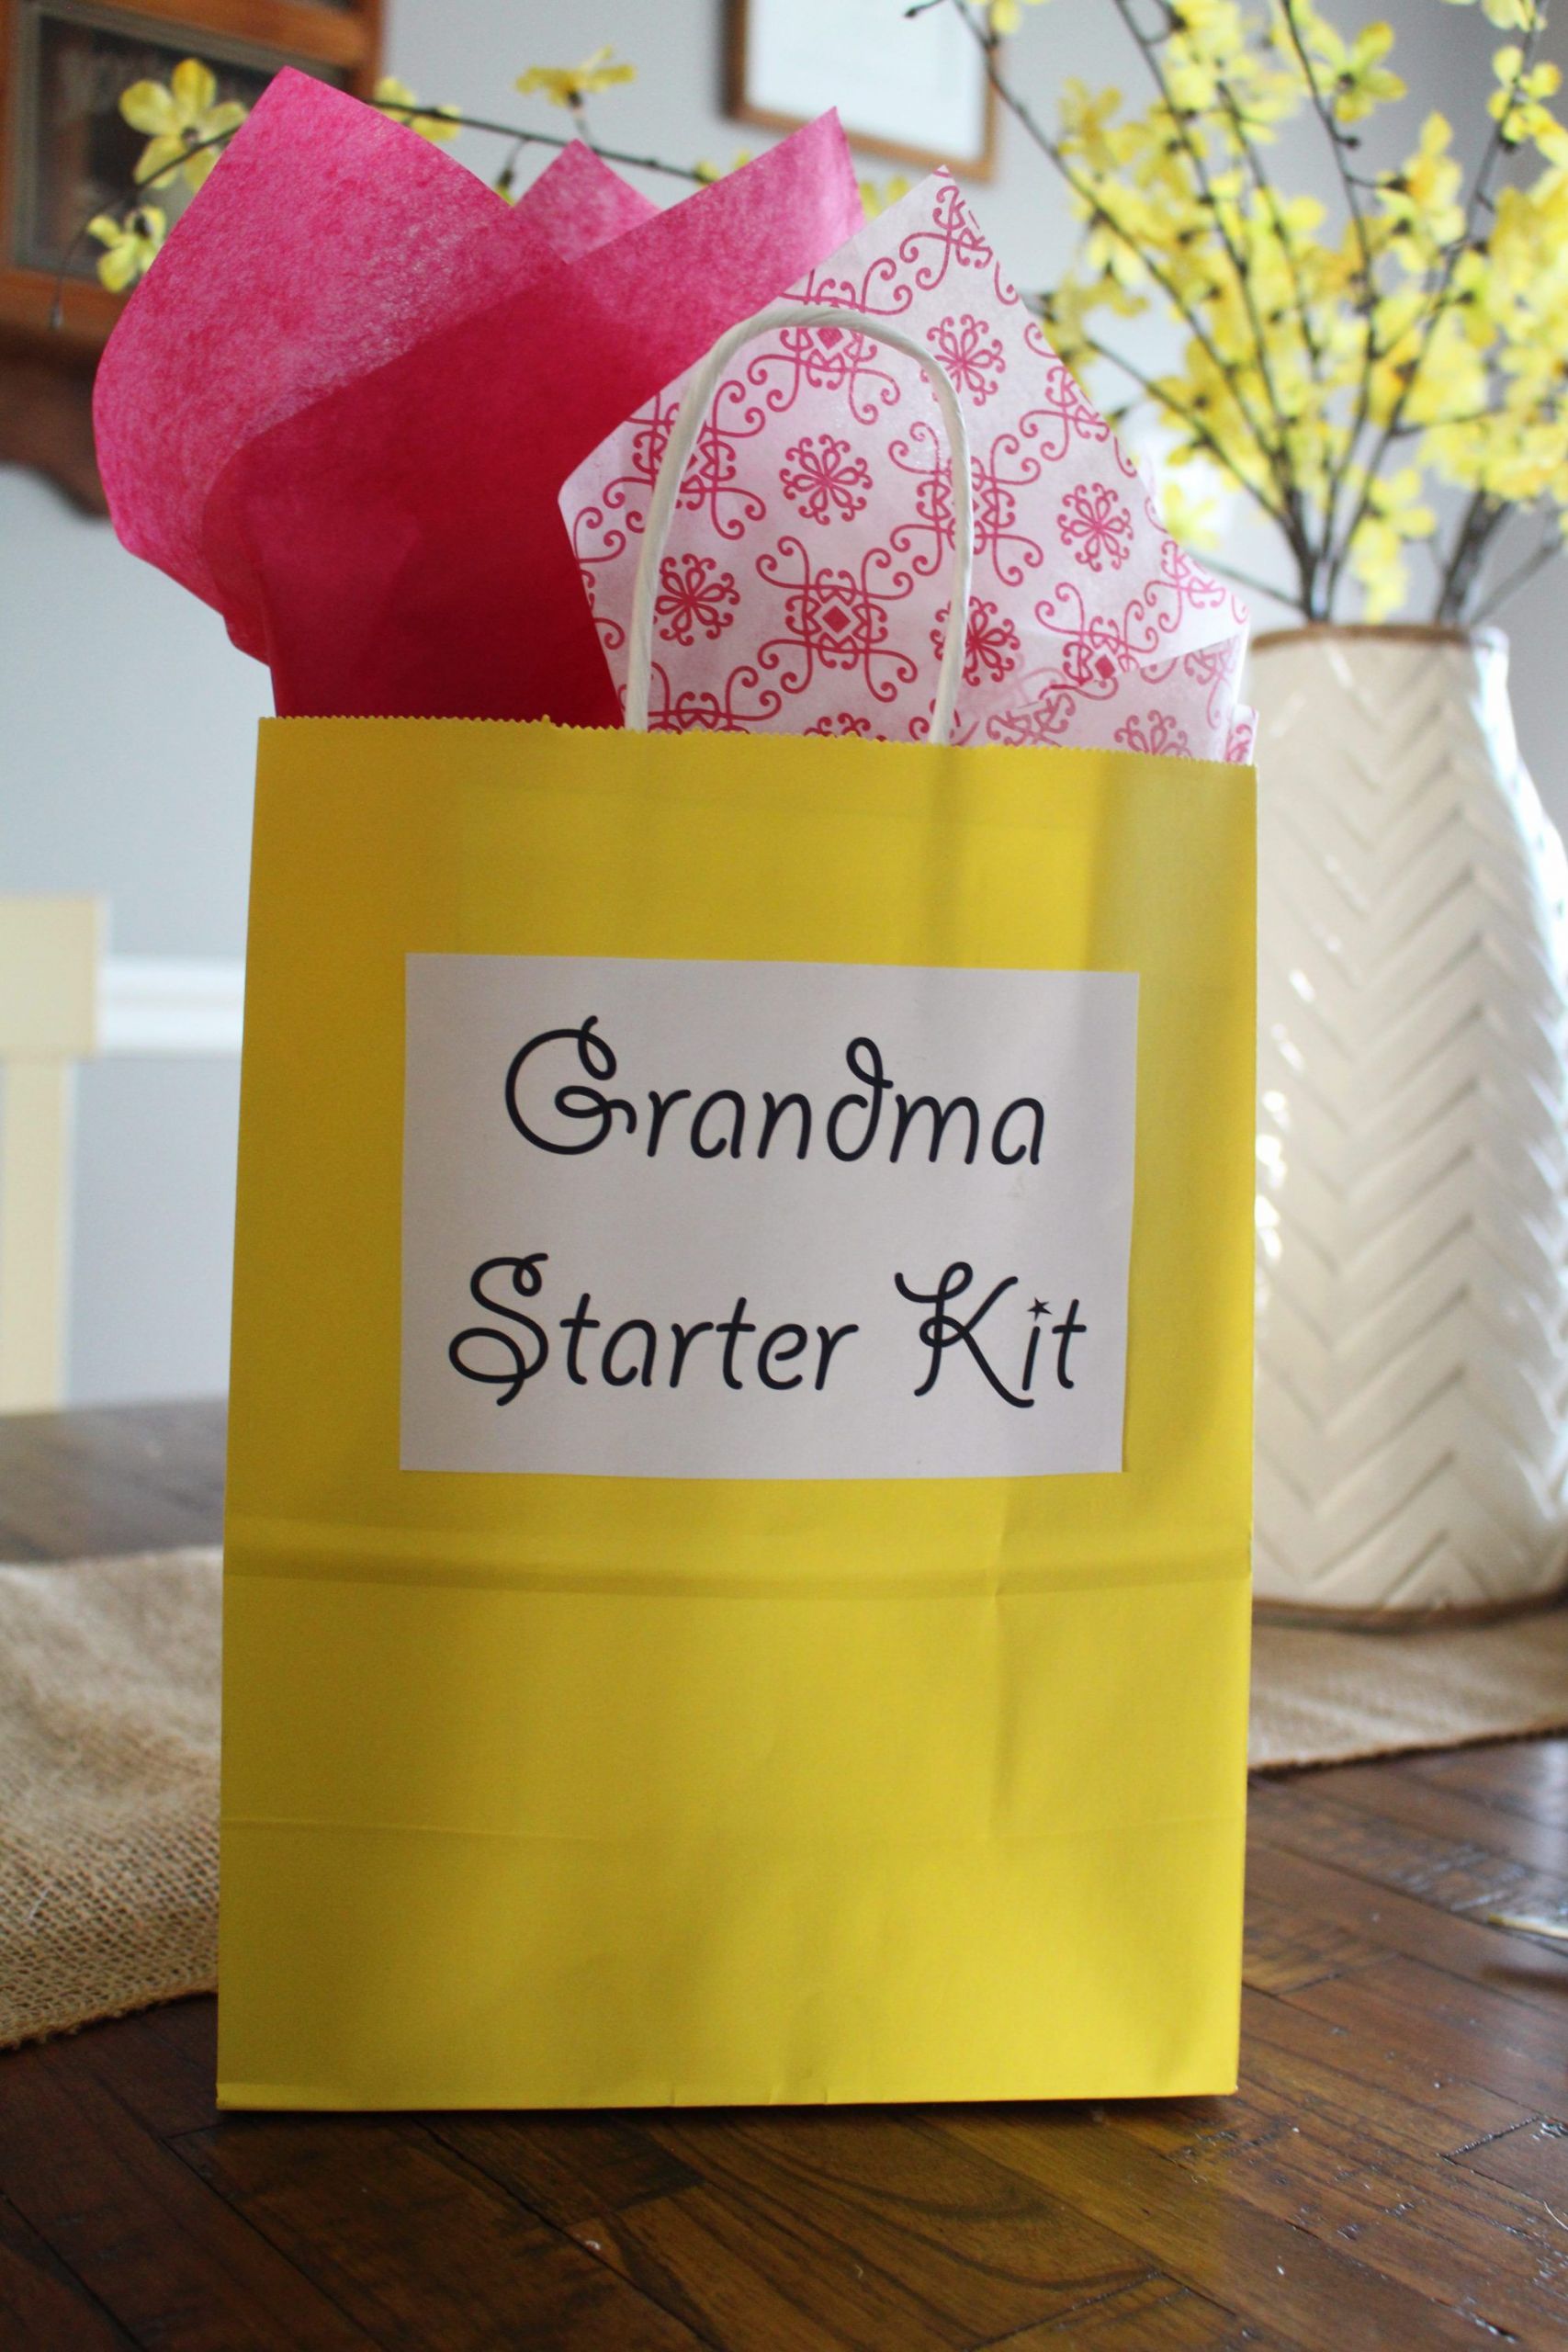 Grandmother Gifts From Baby
 Grandma Starter Kits